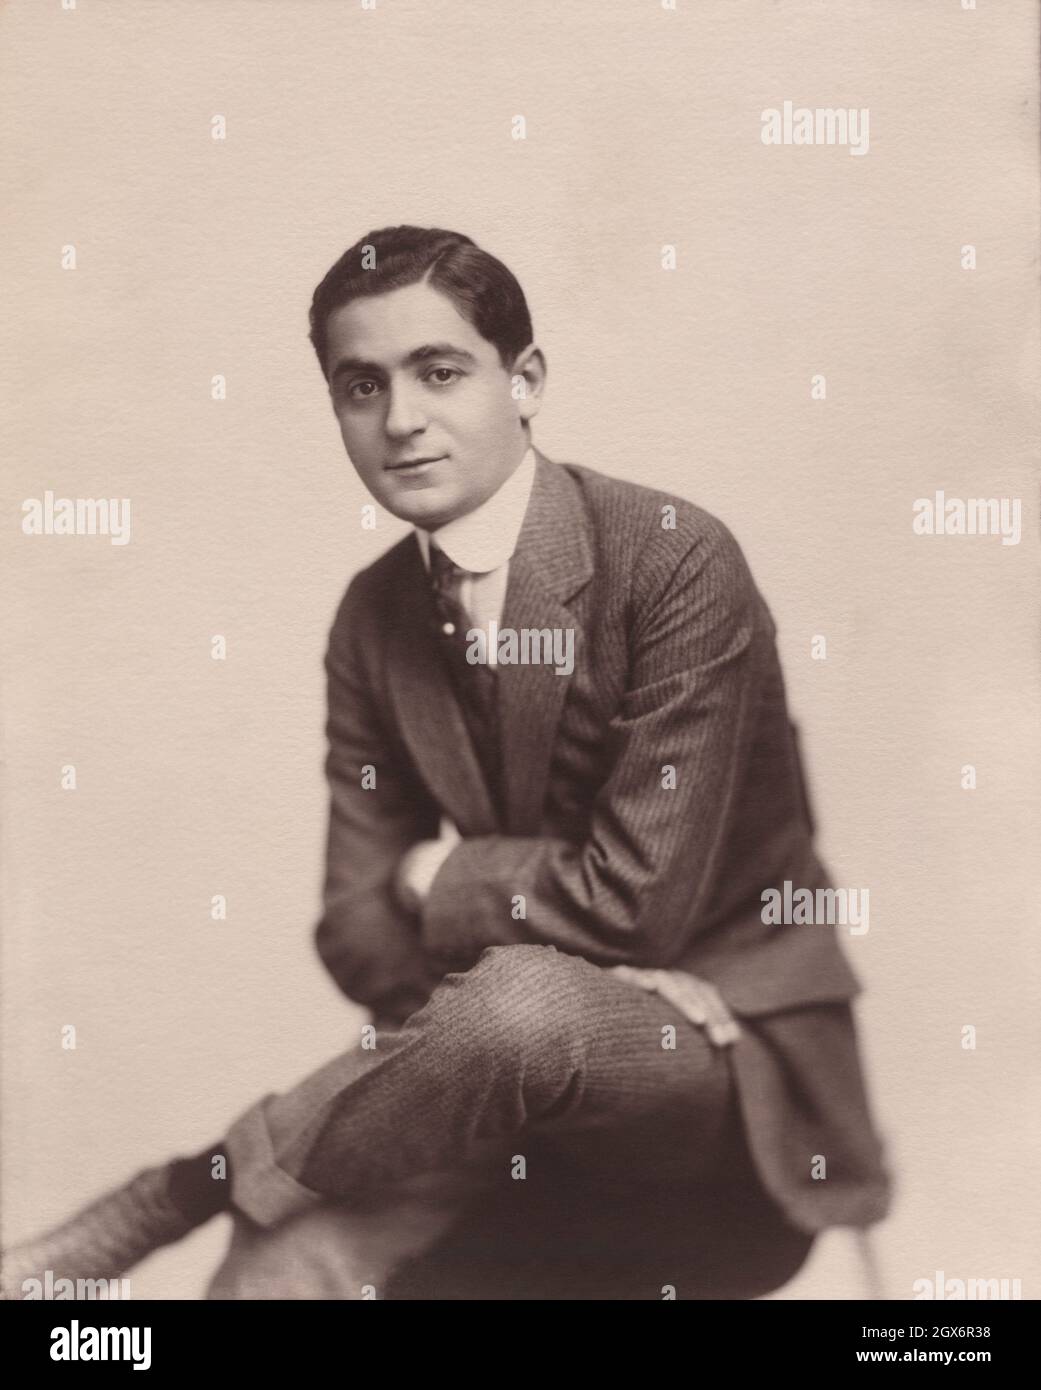 Irving Berlin (1888-1989), American Composer and Lyricist, seated Portrait, Pach Brothers Studio, 1907 Stock Photo